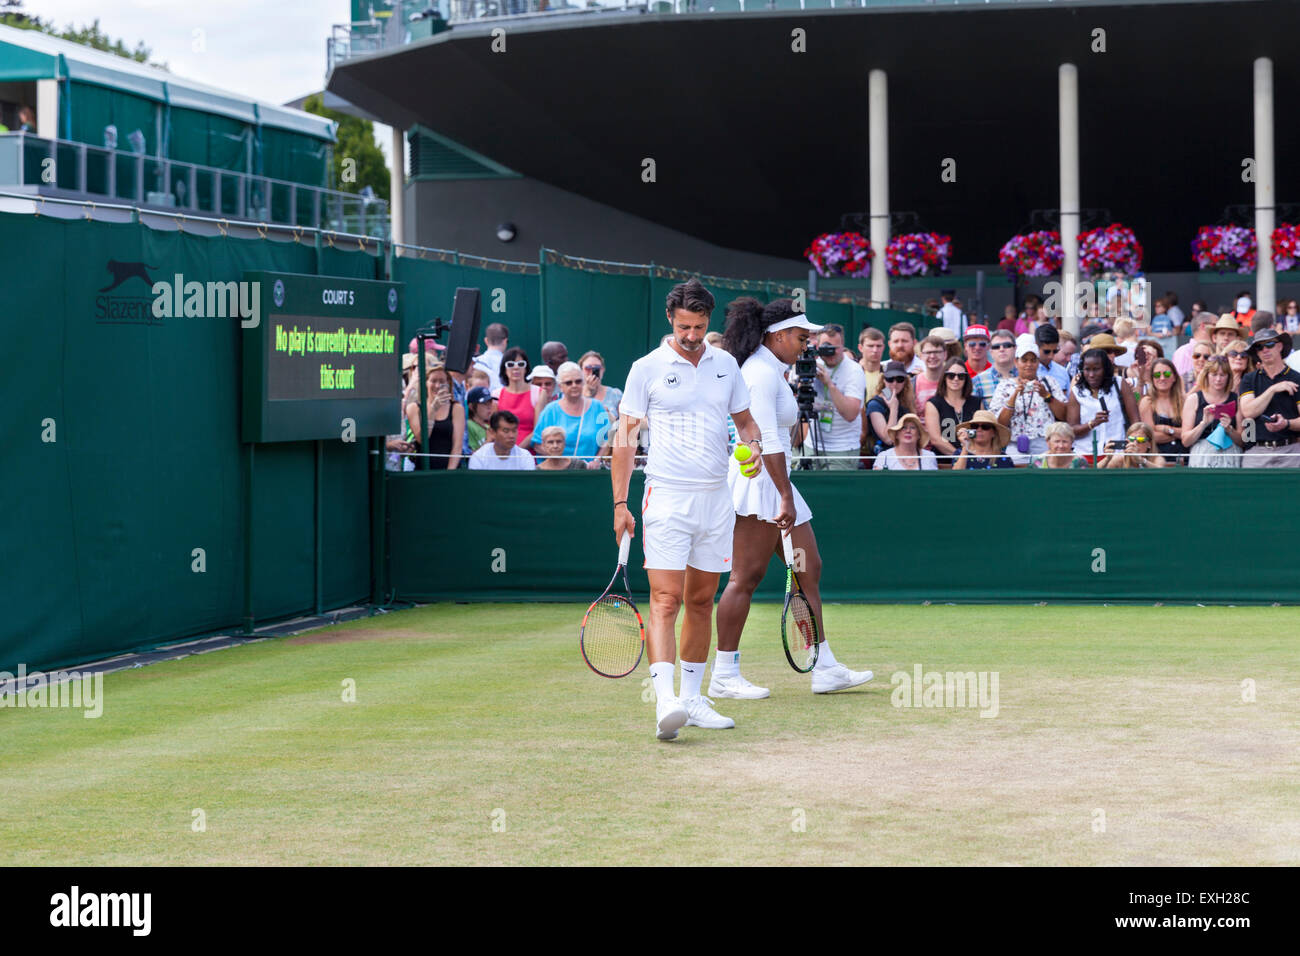 Serena Williams warms up for play on court No. 5, helped by coach Patrick Mouratoglou, during the Wimbledon Championships 2015 Stock Photo